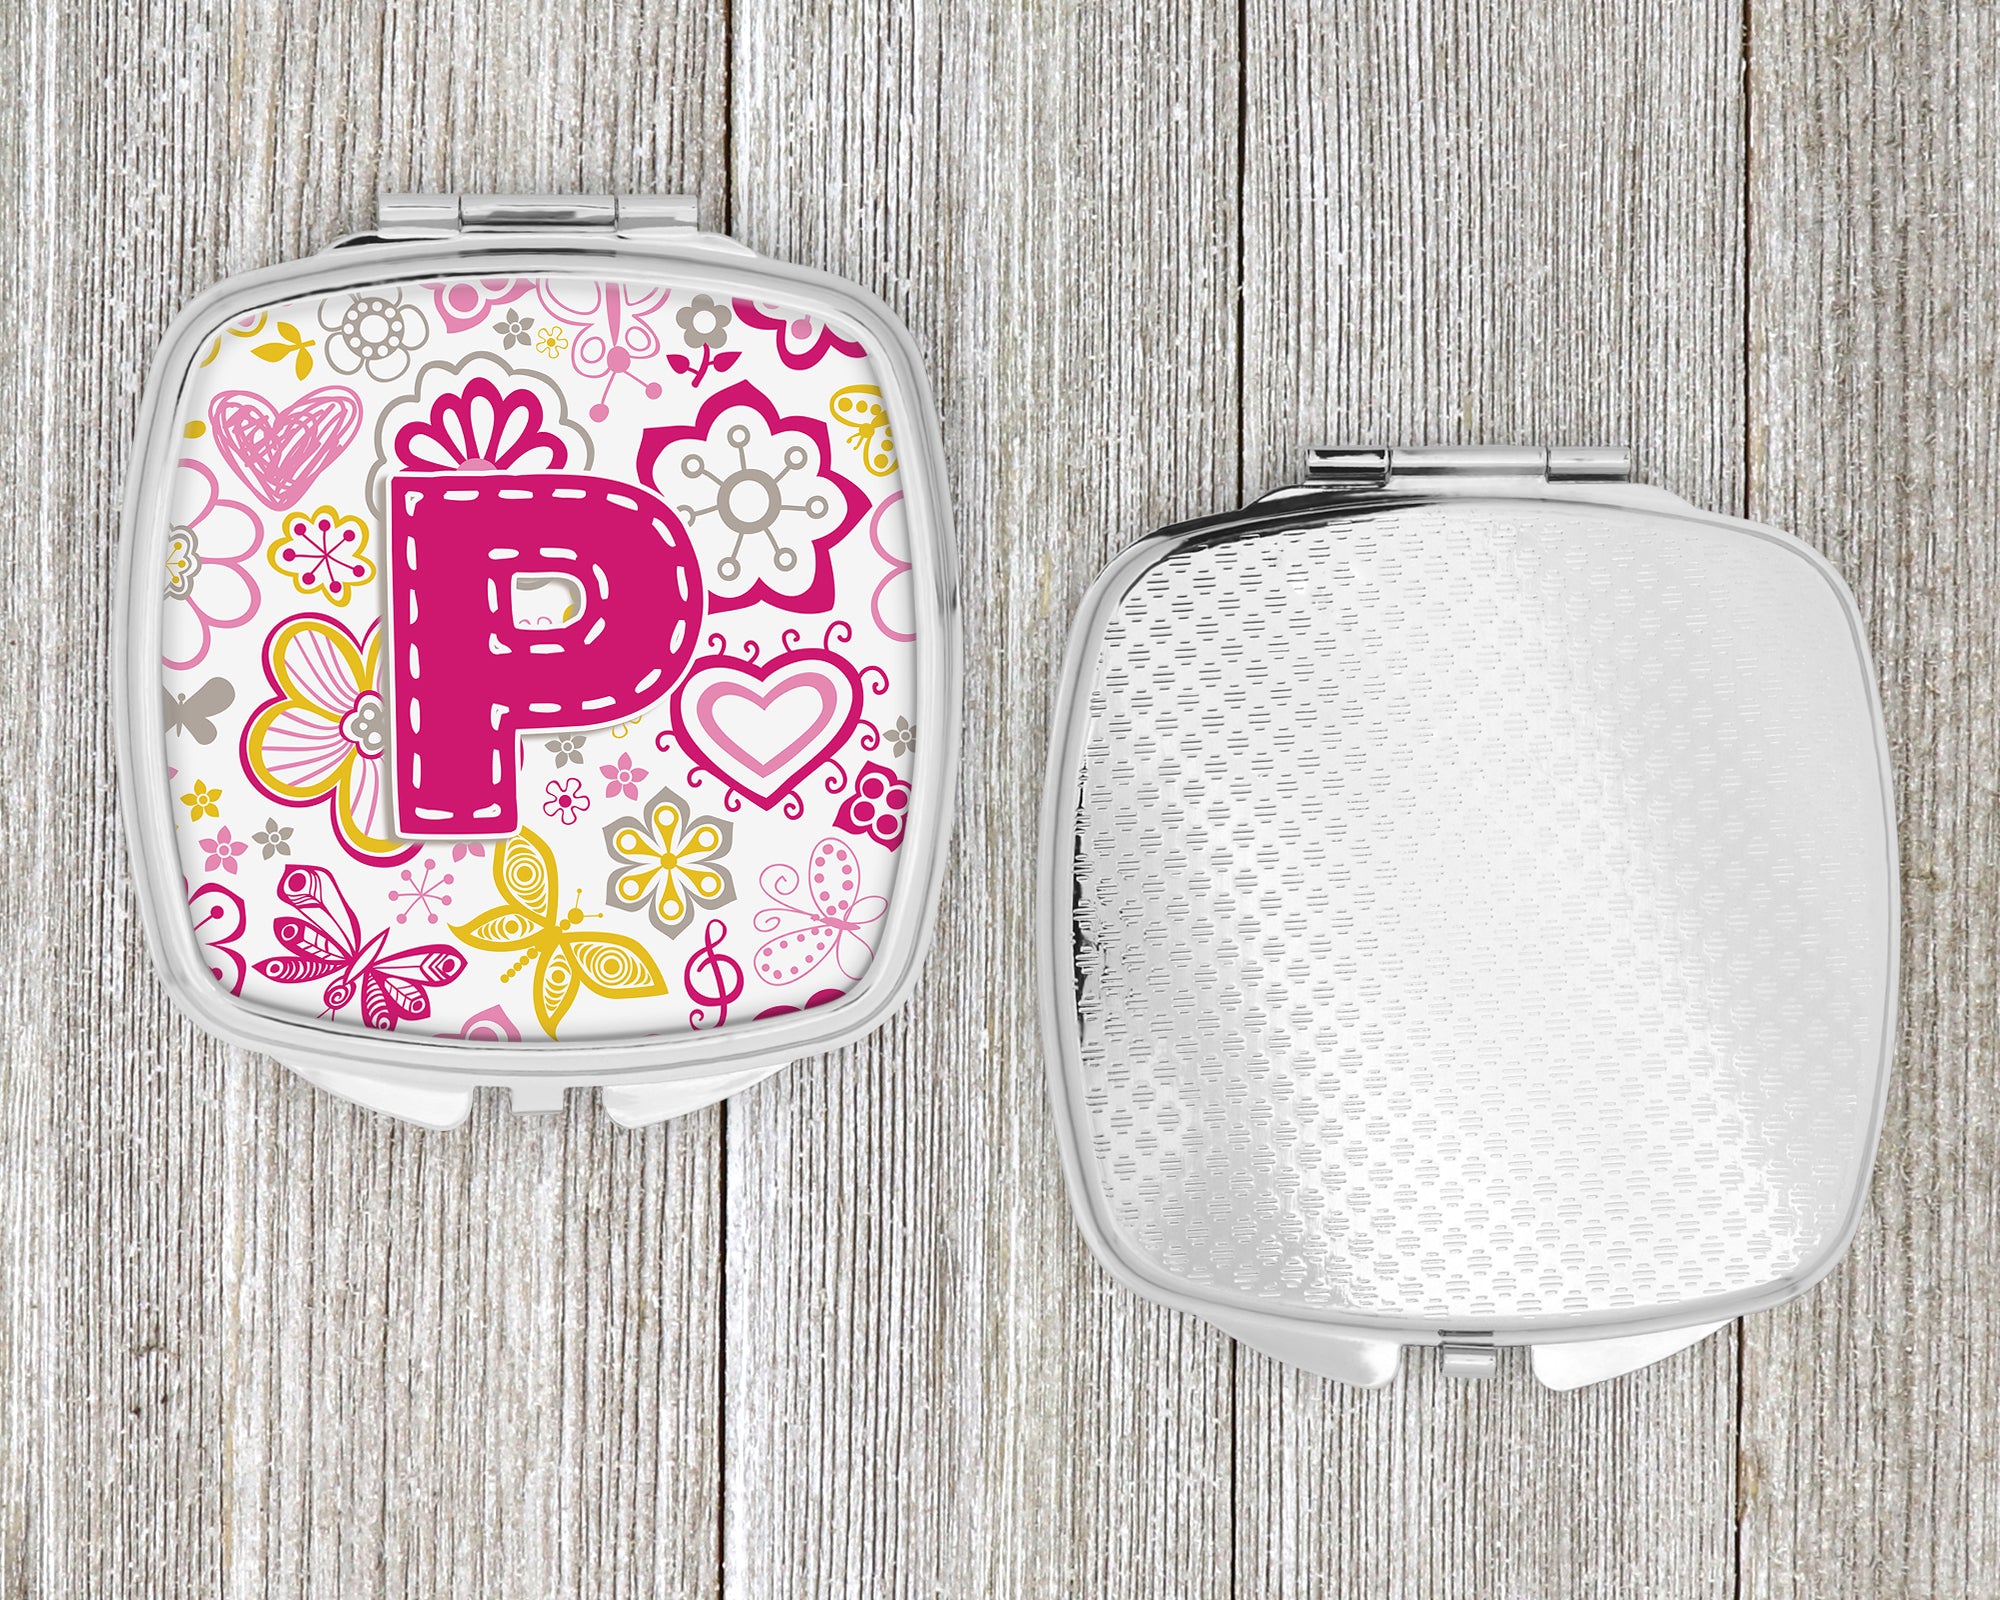 Letter P Flowers and Butterflies Pink Compact Mirror CJ2005-PSCM  the-store.com.